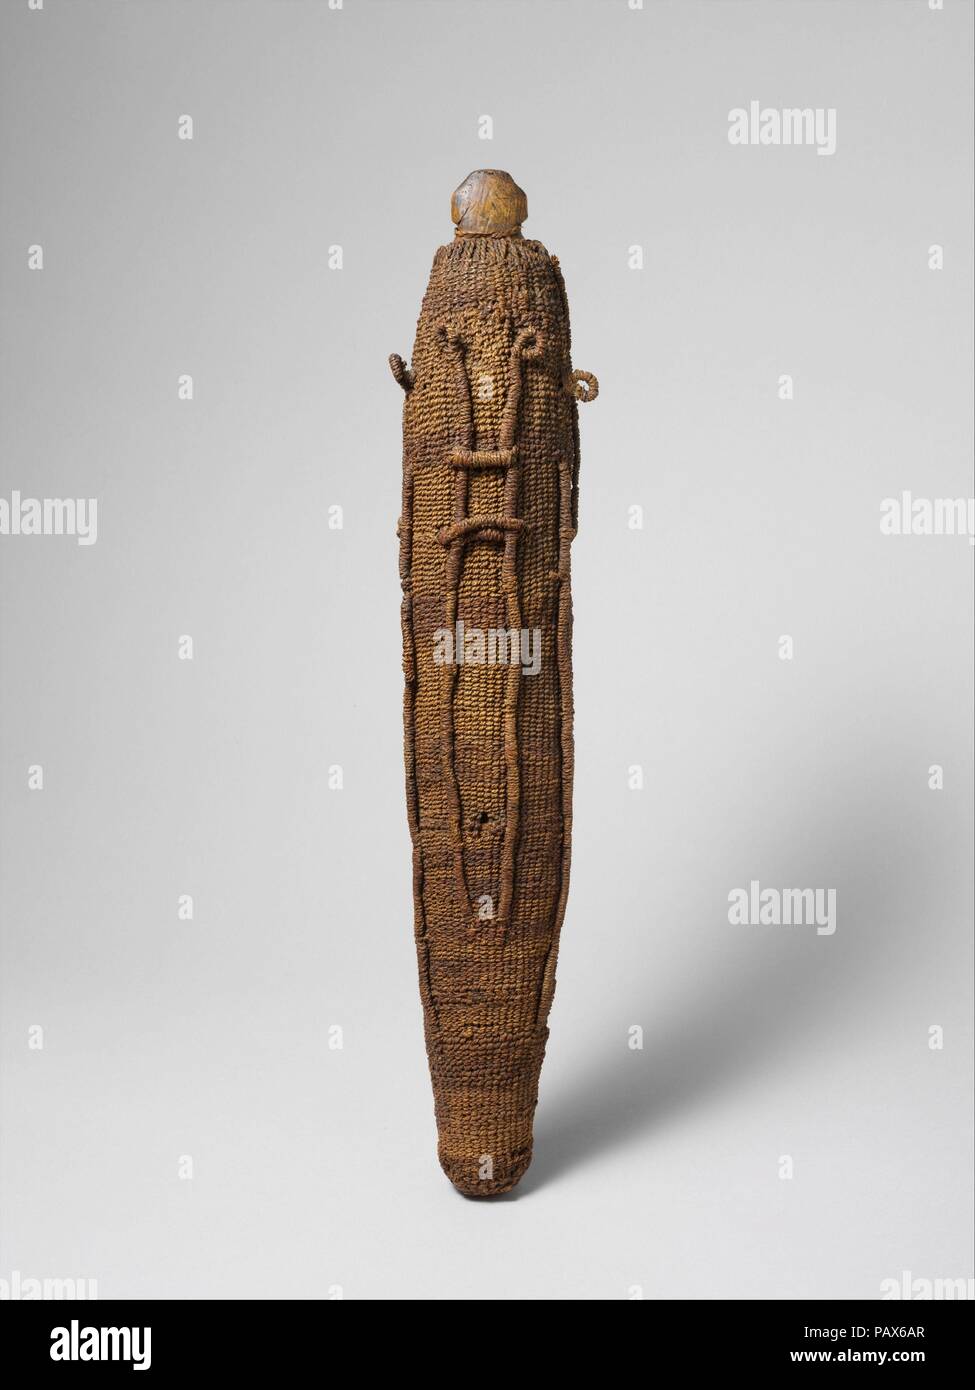 Image (To'o) representing the deity 'Oro. Culture: Maohi (Tahitian). Dimensions: H. 18 1/8 x Diam. 2 7/8 in. (46 x 7.3 cm). Date: 18th century.  Although human images in Polynesian sculpture are predominantly naturalistic, there are a number of instances in which the human form is taken almost to abstraction, for example, in images of the Tahitian war god 'Oro. Composed of a solid wooden core covered by intricately plaited layers of coconut fiber cordage, the images of 'Oro appear almost clublike, with the eyes, ears, and other facial features only lightly delineated in the outermost layer of  Stock Photo